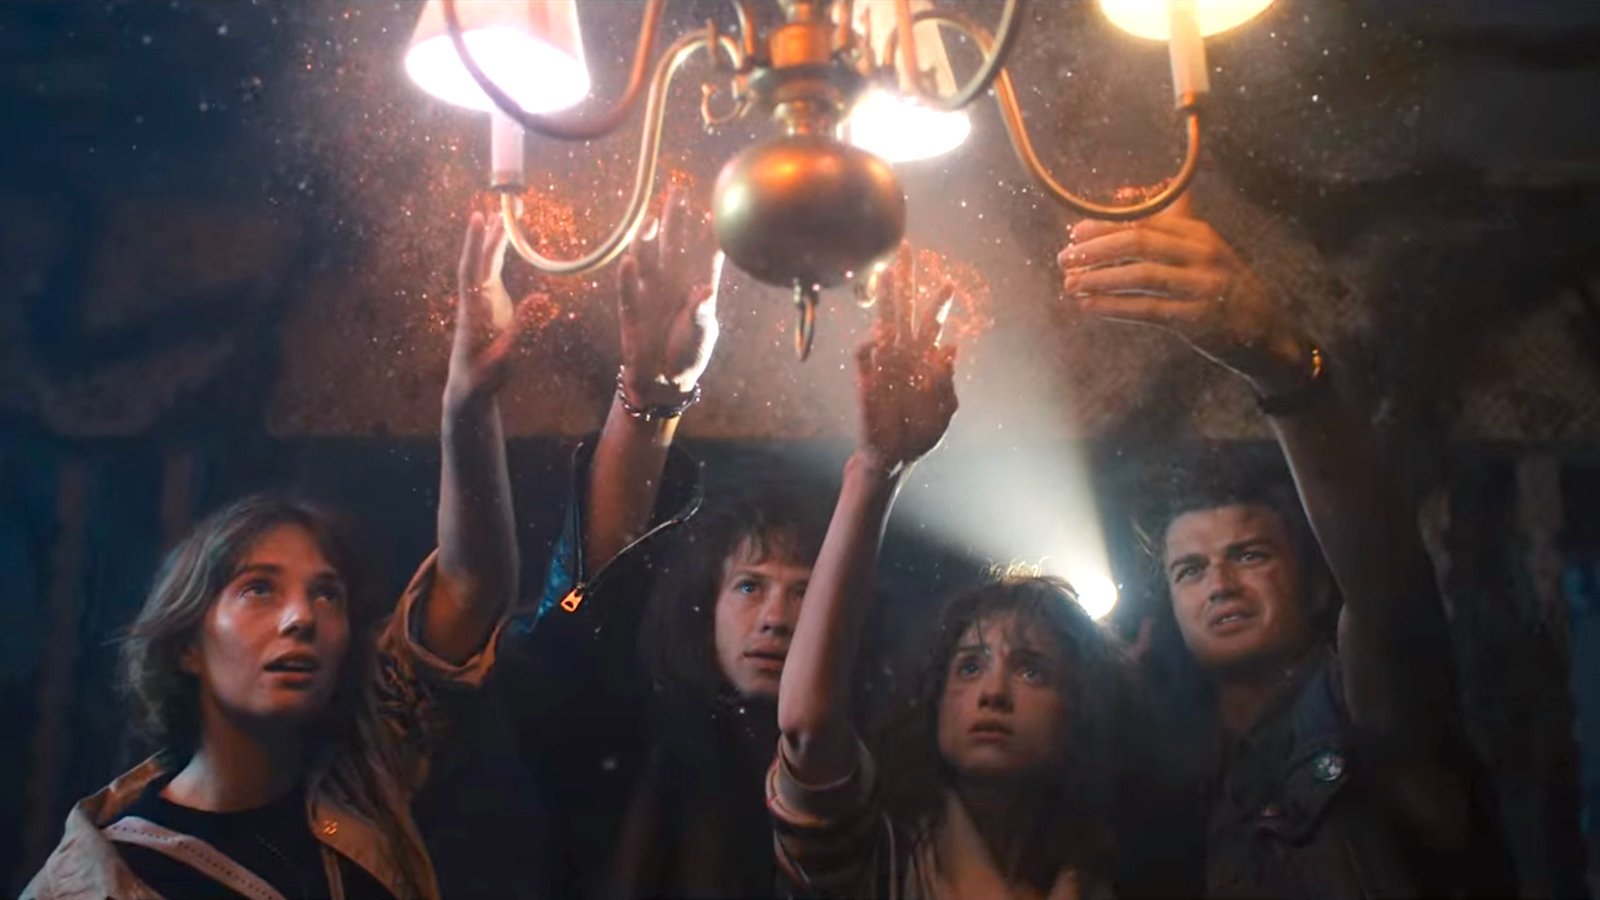 Robin, Eddie, Nancy, and Mike from 'Stranger Things' reaching to touch a lit chandelier with sparkly dust emanating from it 